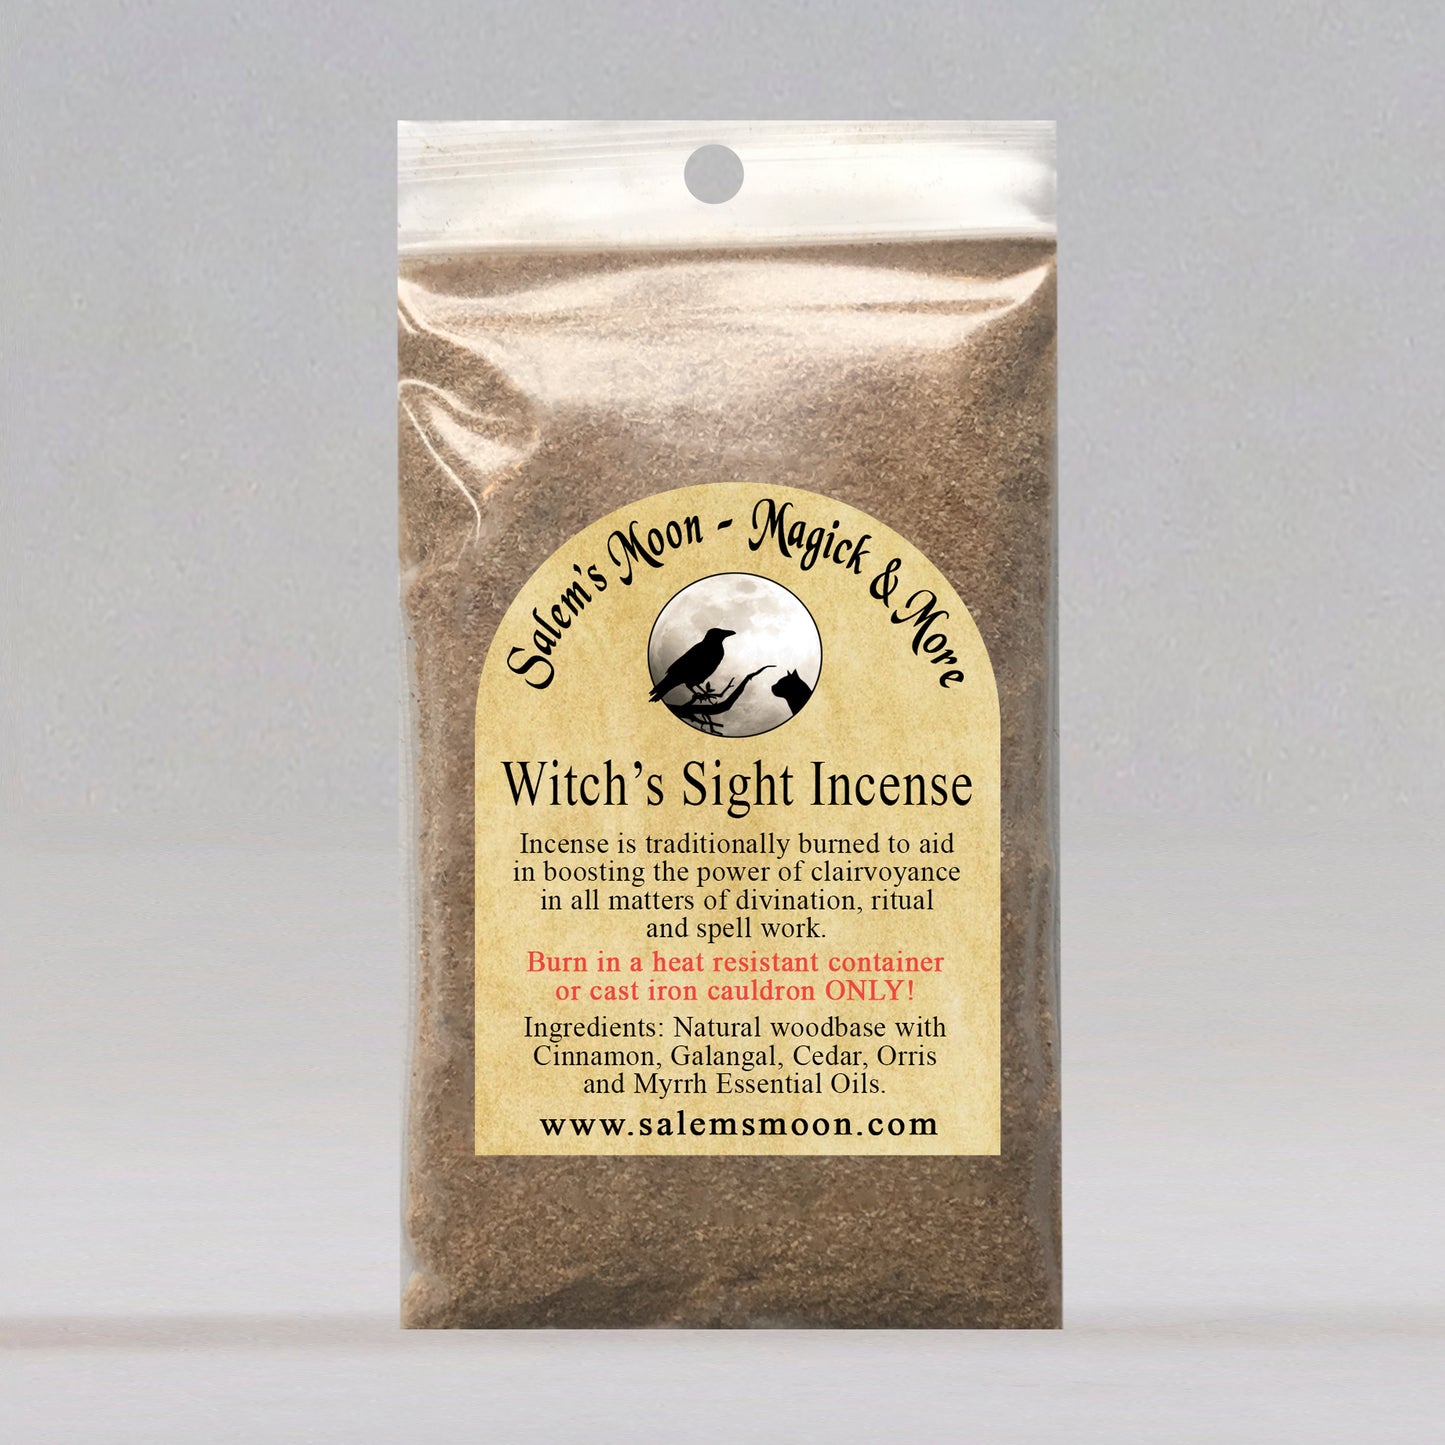 Witch's Sight Incense